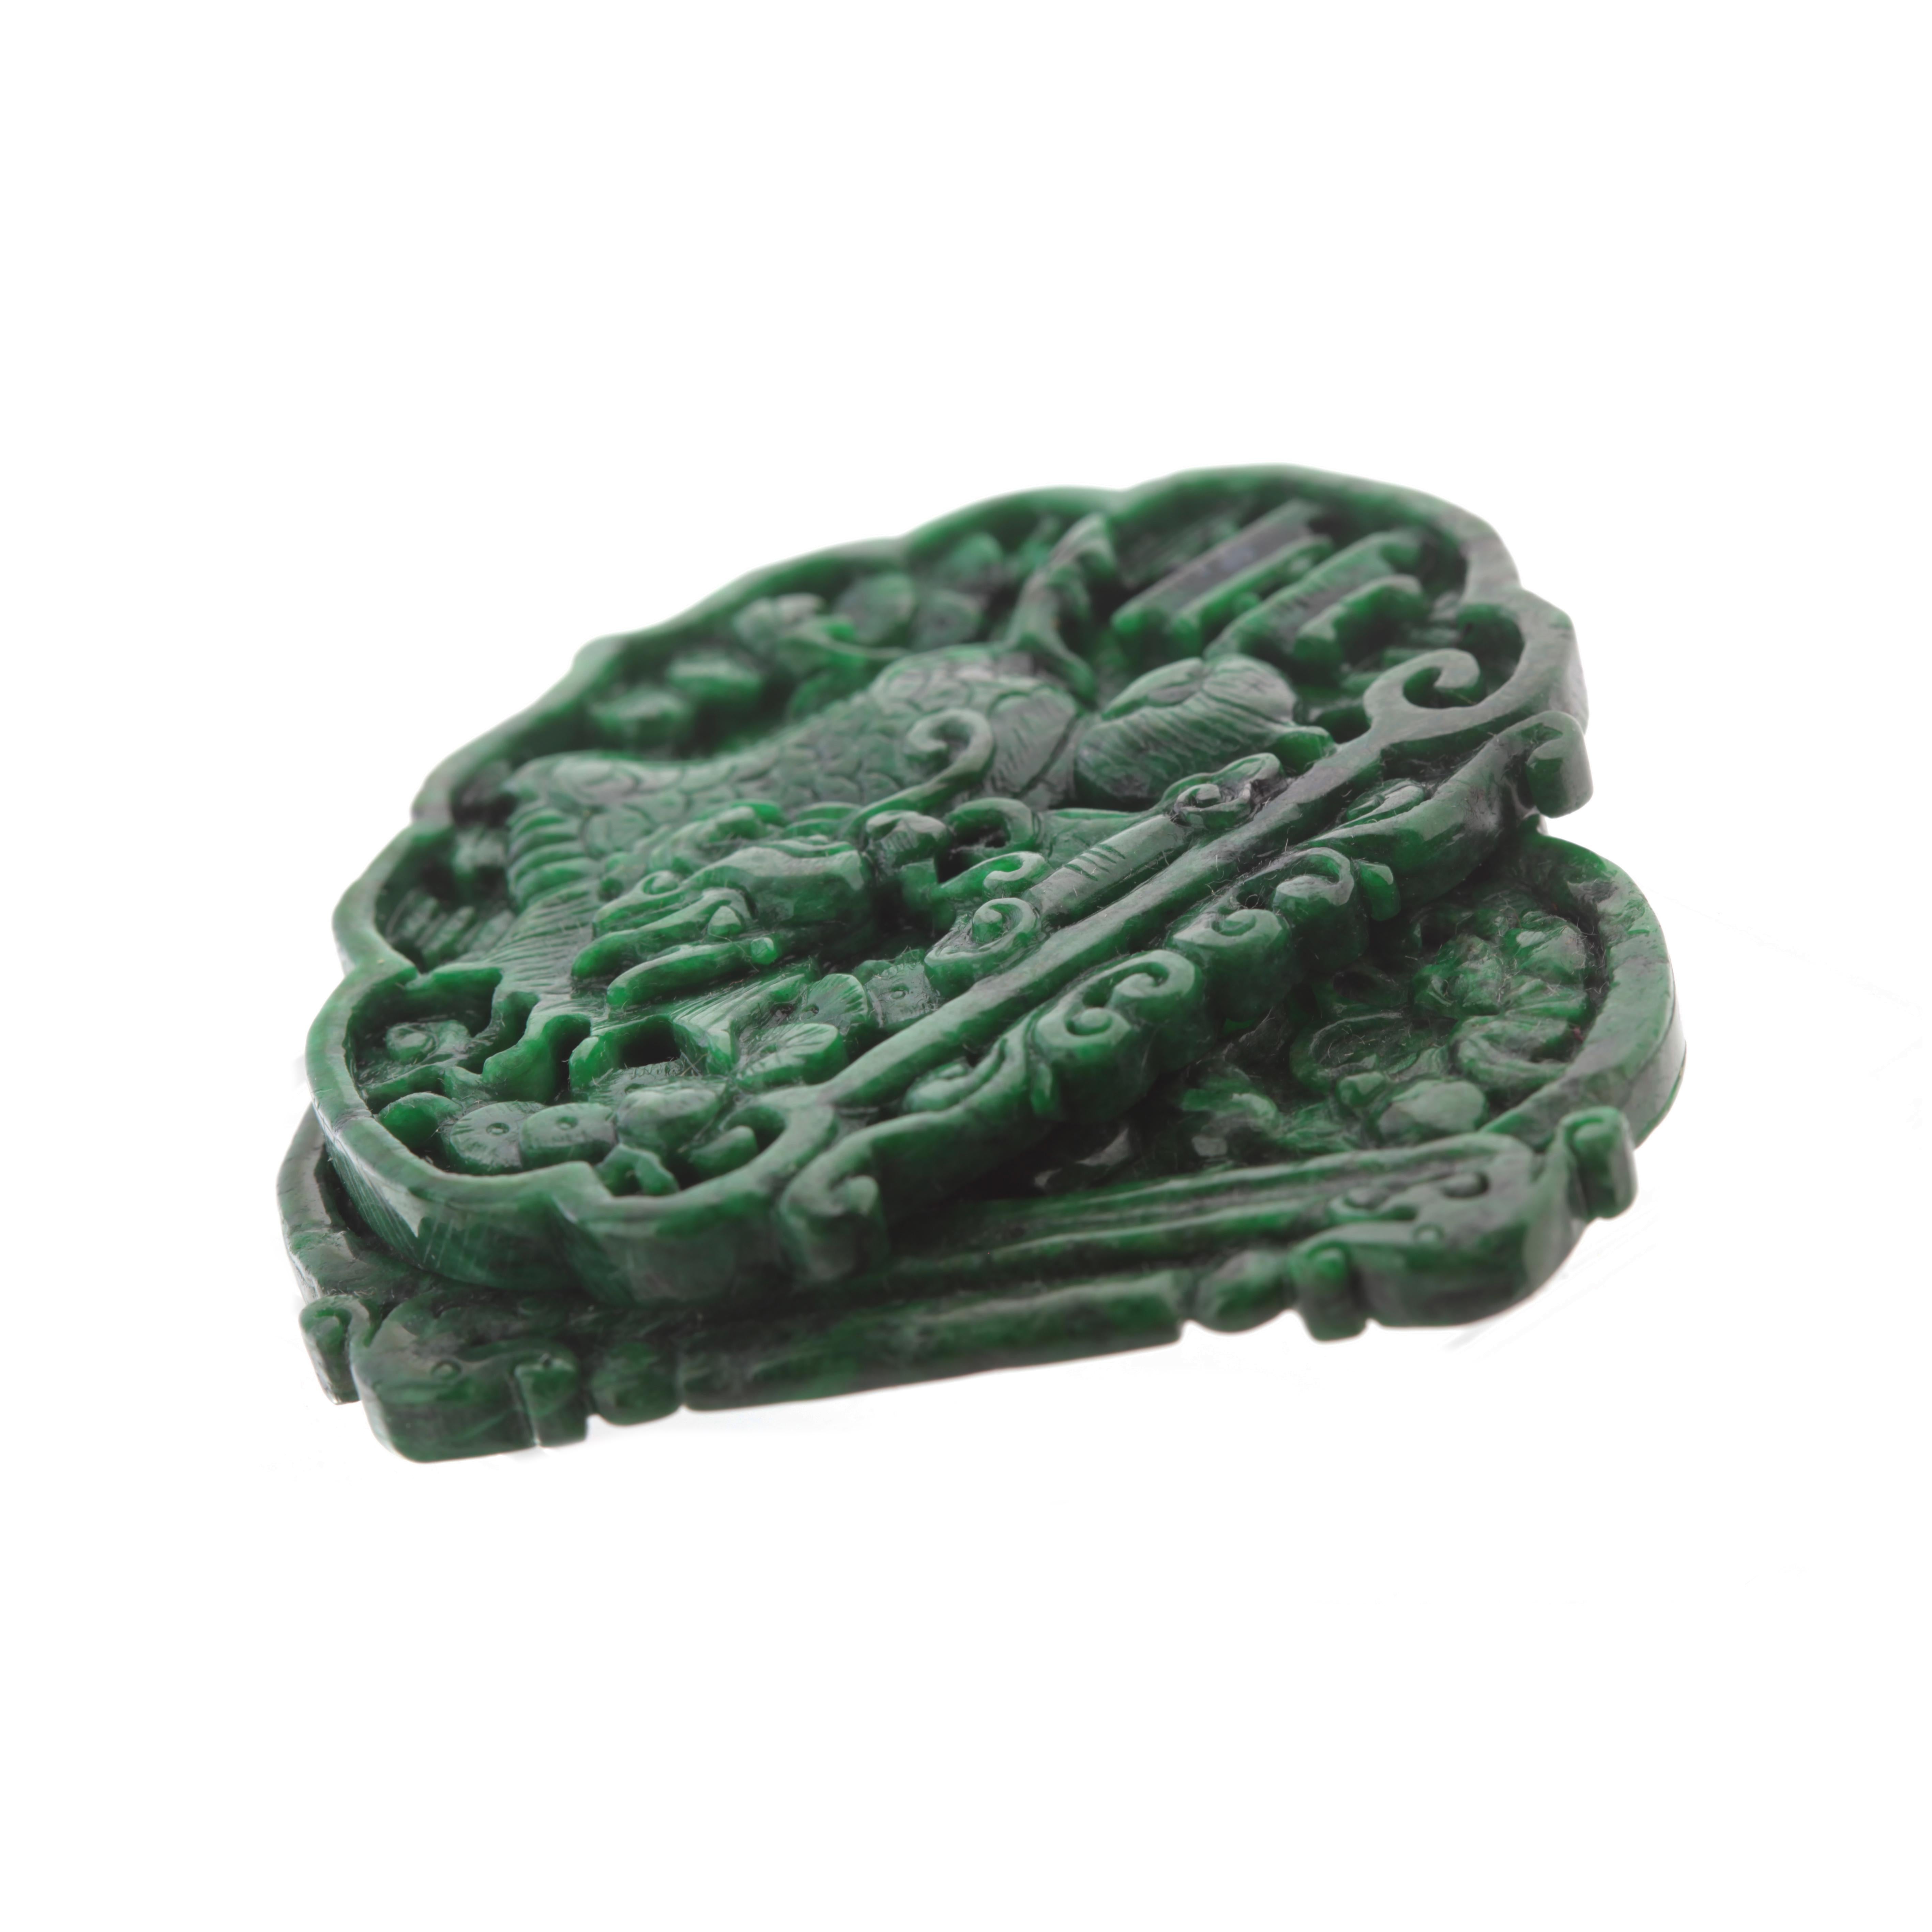 Chinese Carved Pendant Omphacite Jade Natural Jadeite Asian Art Dragon Figurine Statue